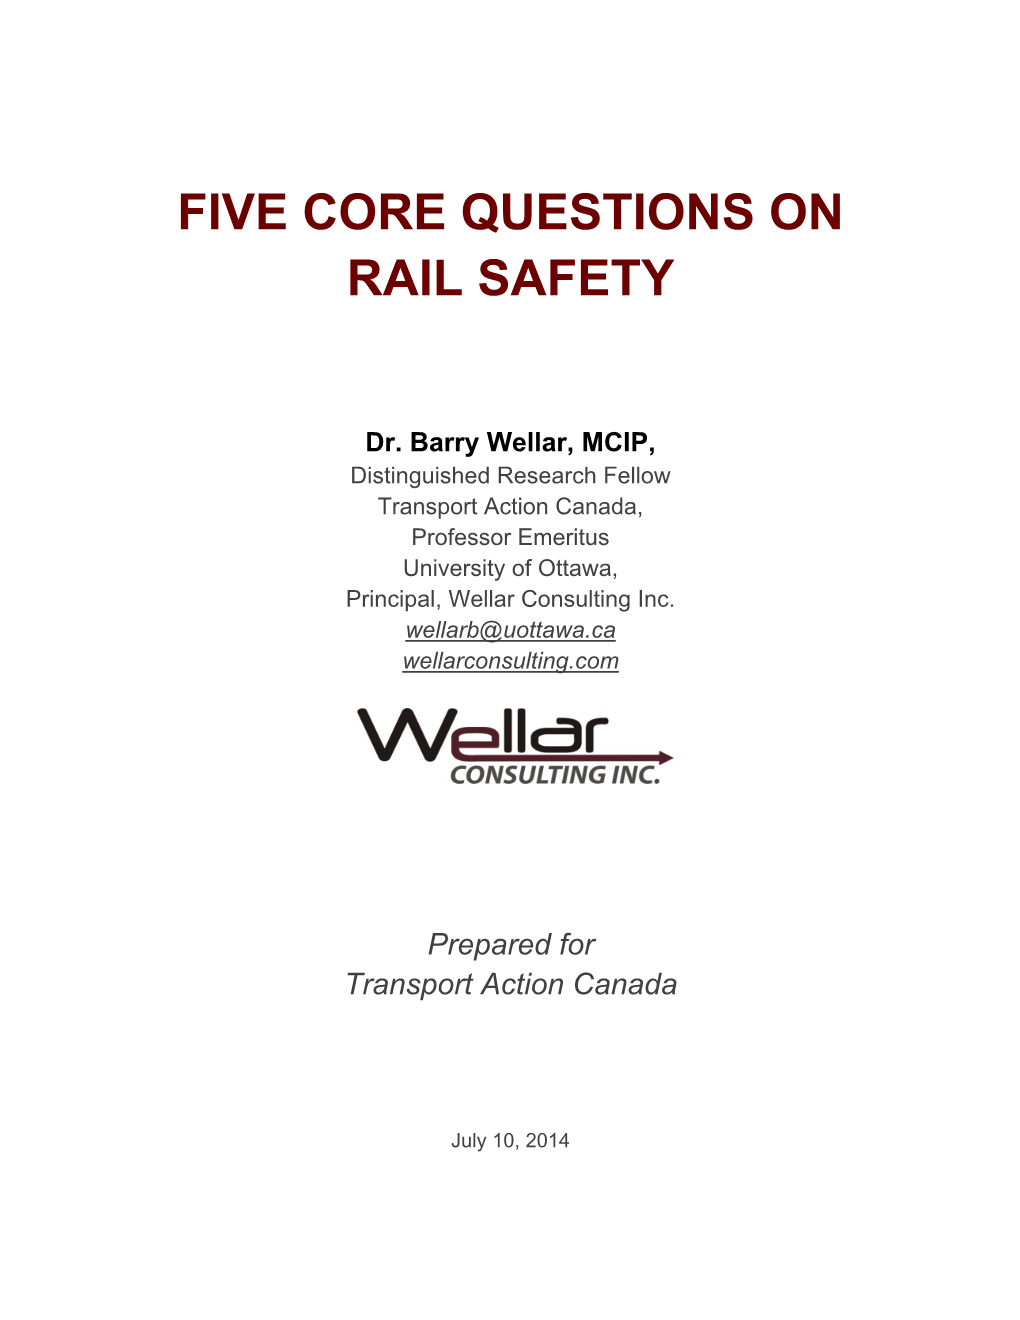 Five Core Questions on Rail Safety